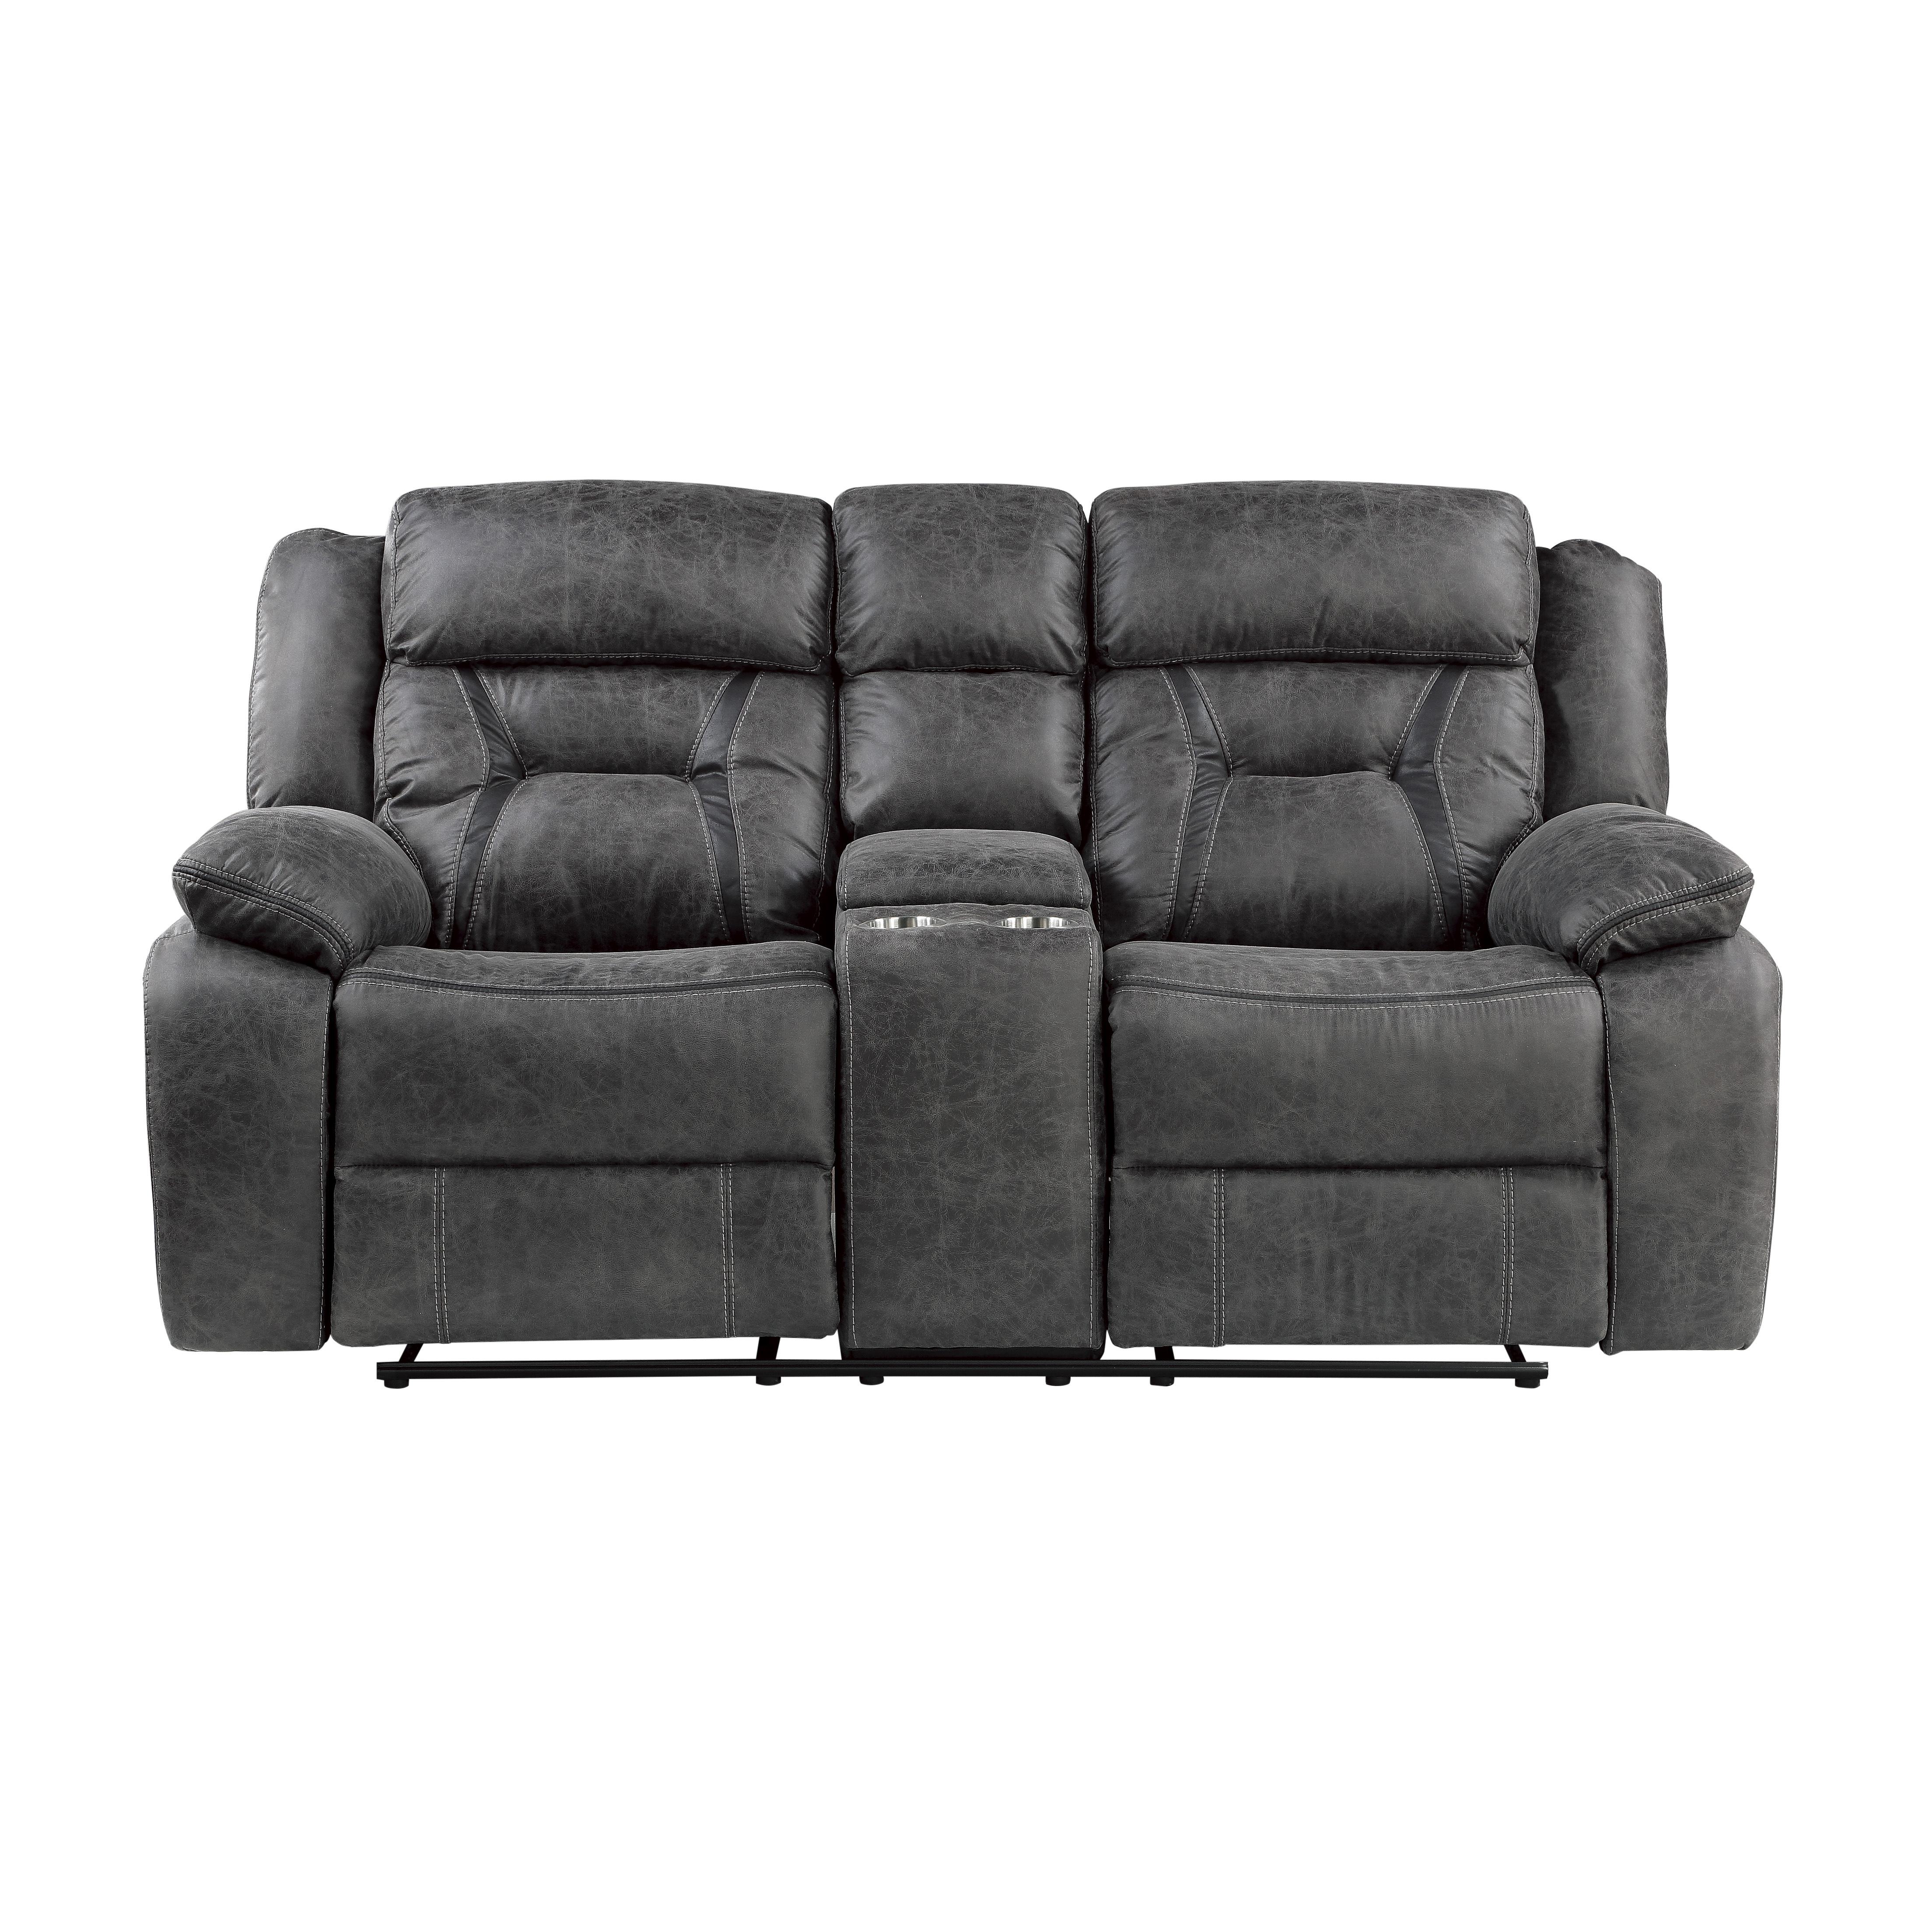 Modern Reclining Loveseat 9989GY-2 Madrona Hill 9989GY-2 in Gray Microfiber